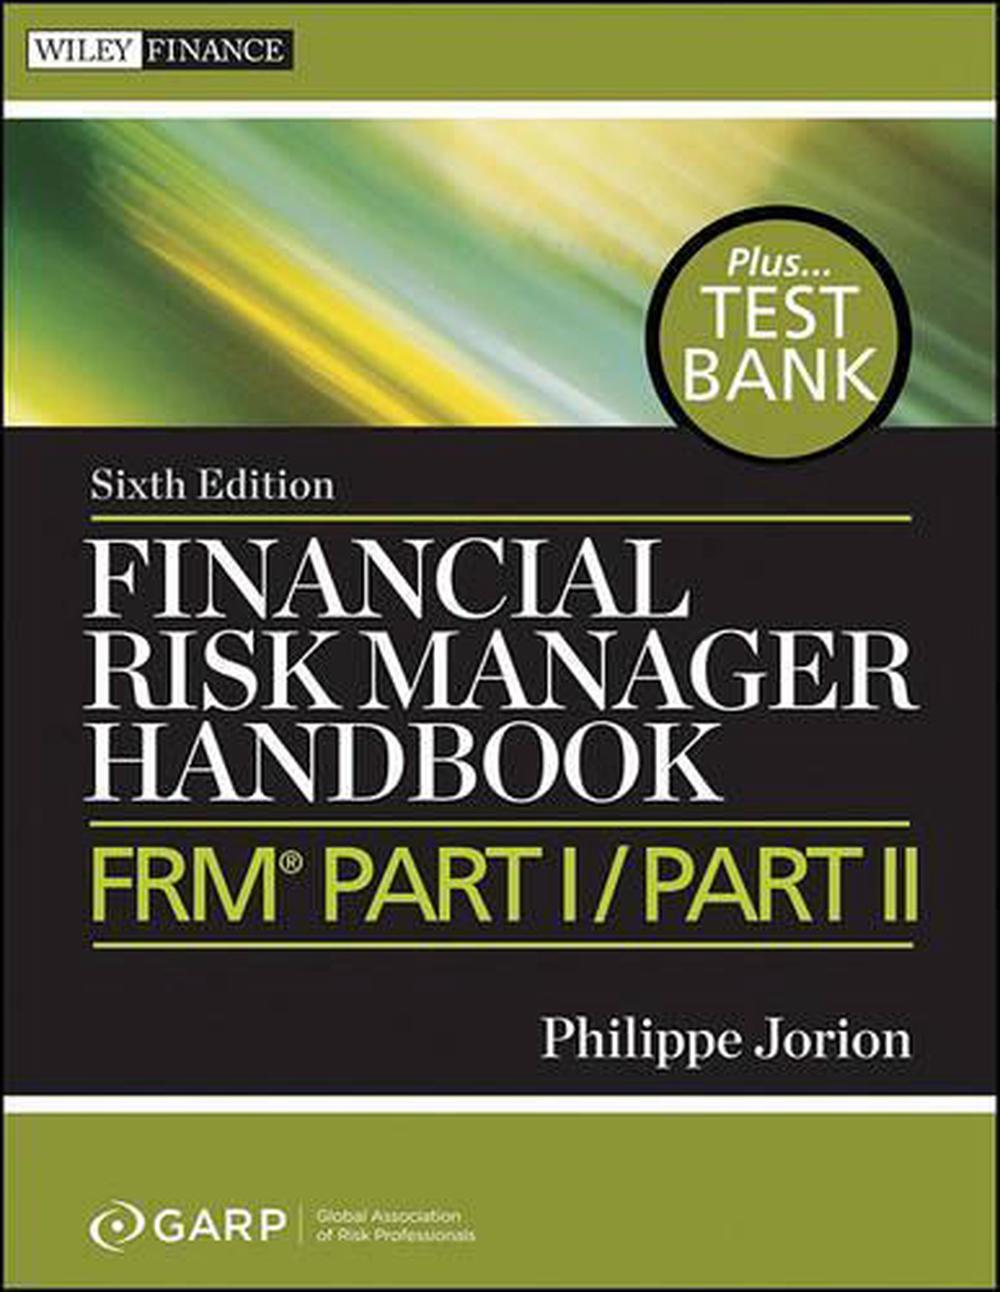 Financial Risk Manager Handbook FRM Part I / Part II + Test Bank by